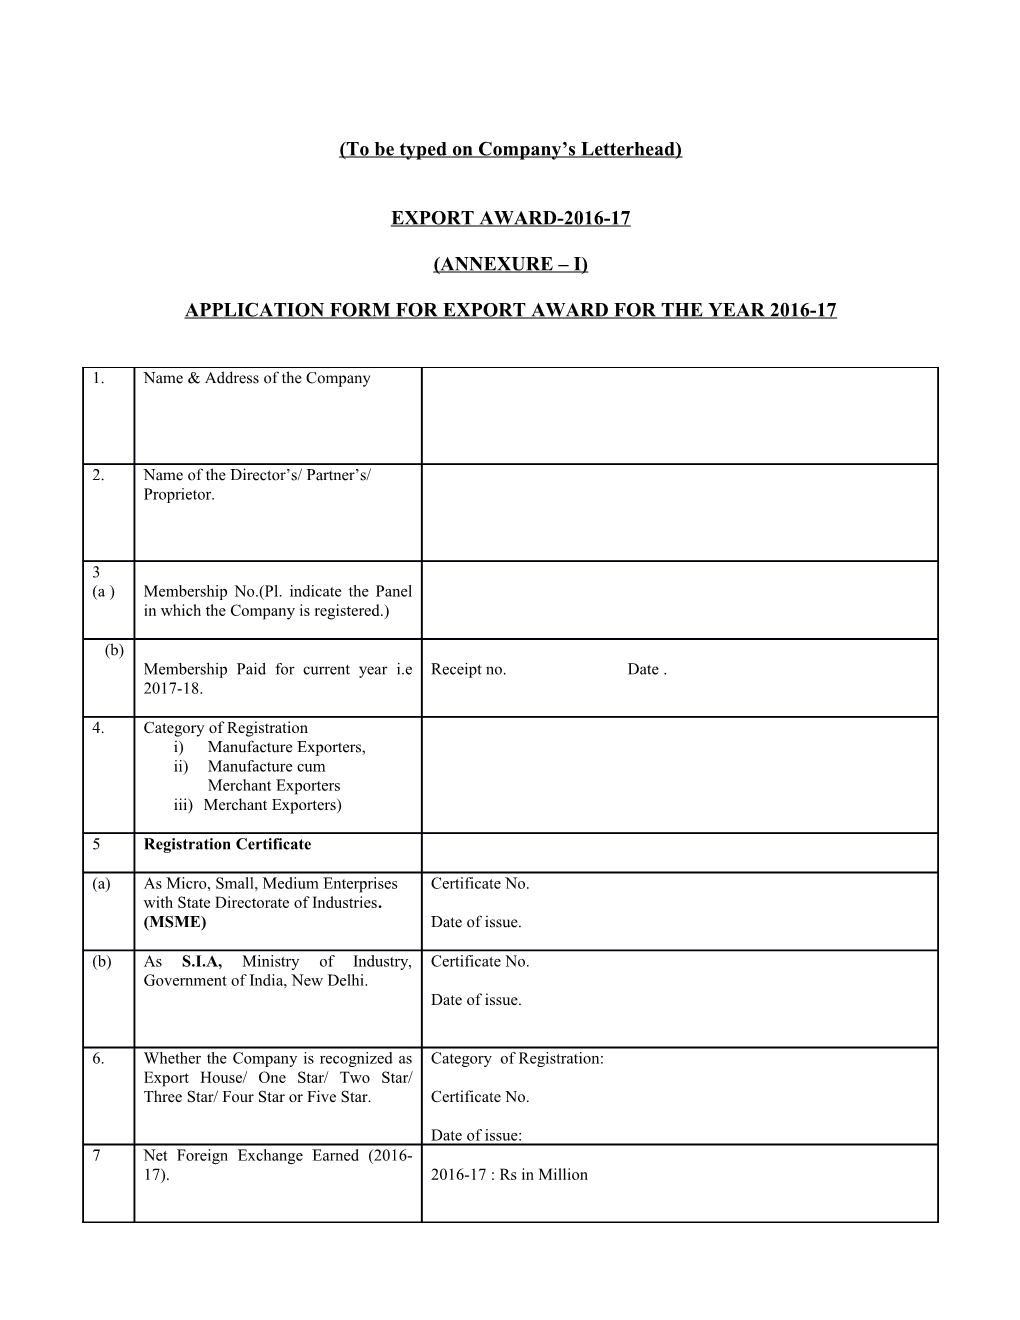 Application Form for Export Award for the Year 2016-17